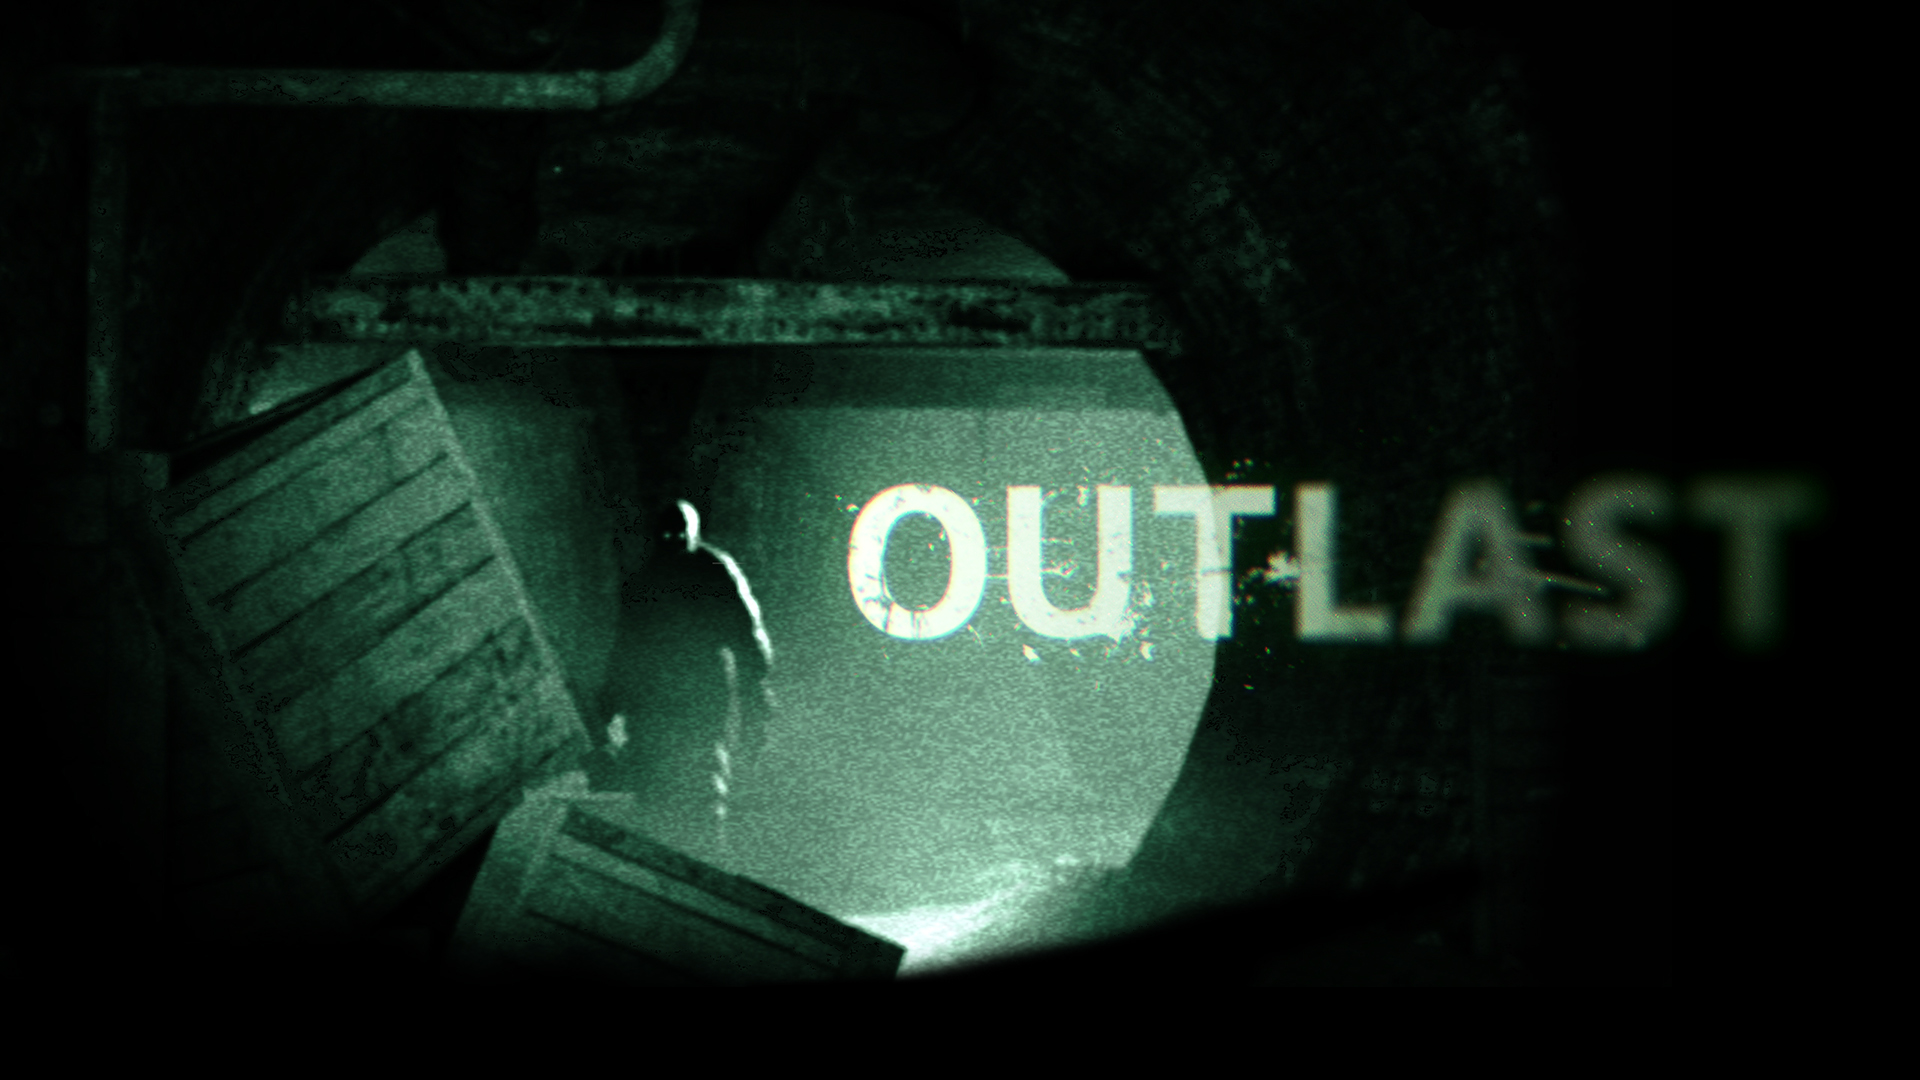 the outlast trials vr